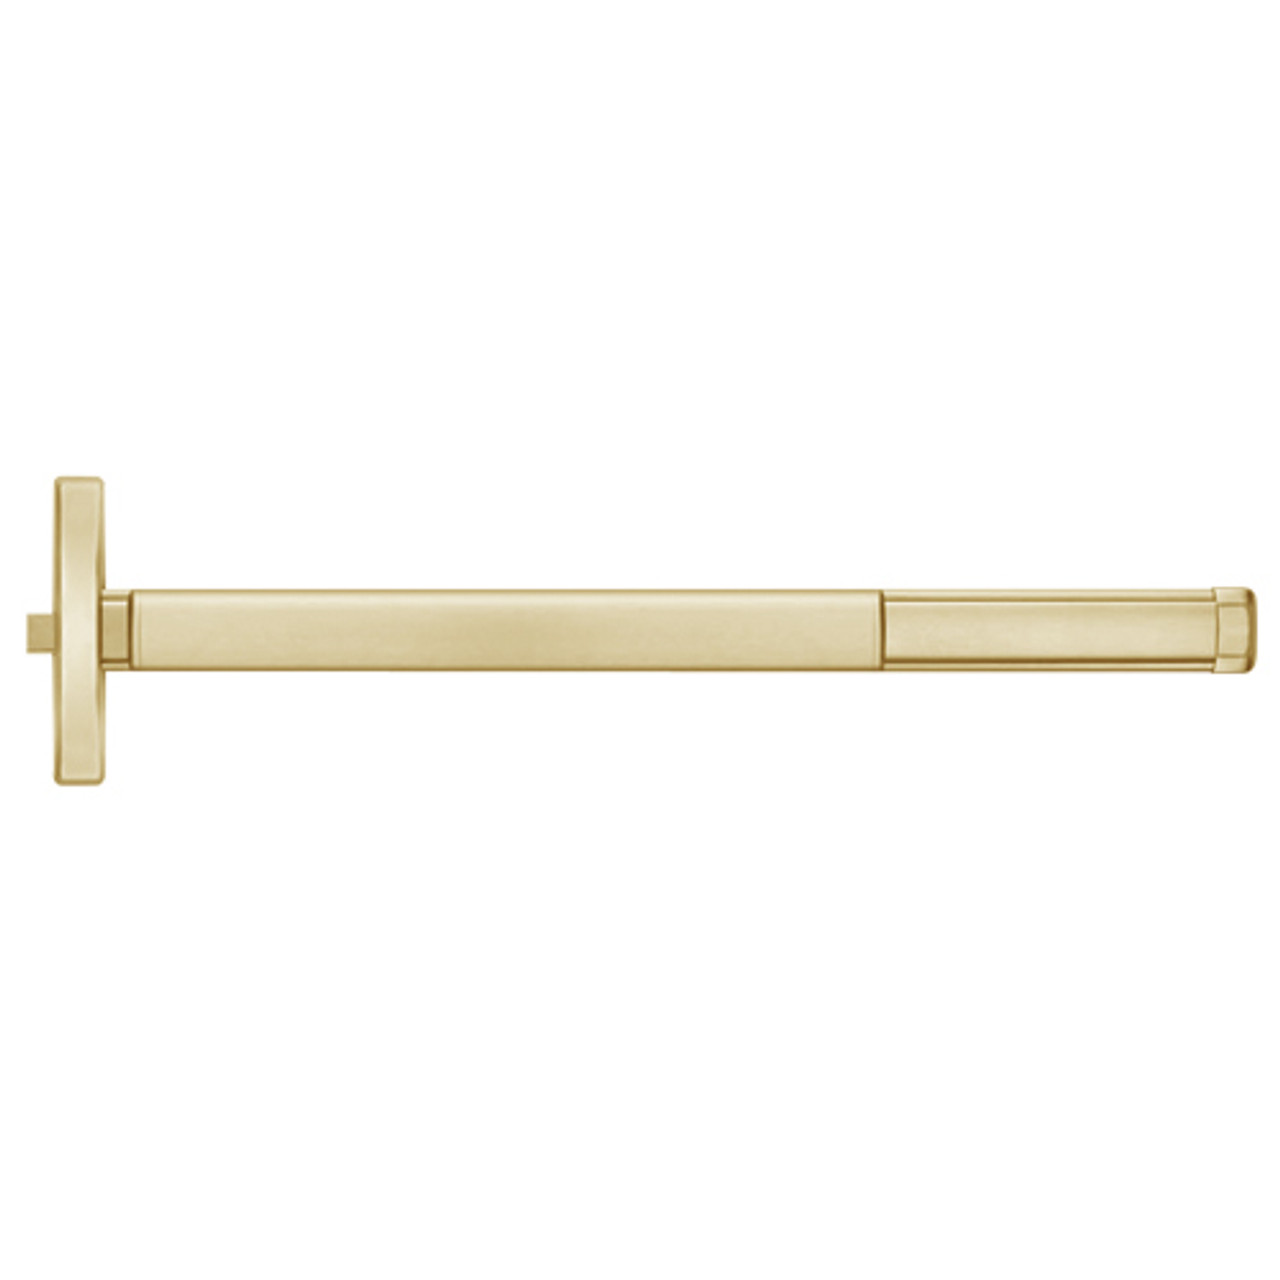 MLR2414-606-48 PHI 2400 Series Non Fire Rated Apex Rim Exit Device with Motorized Latch Retraction Prepped for Lever Always Active in Satin Brass Finish